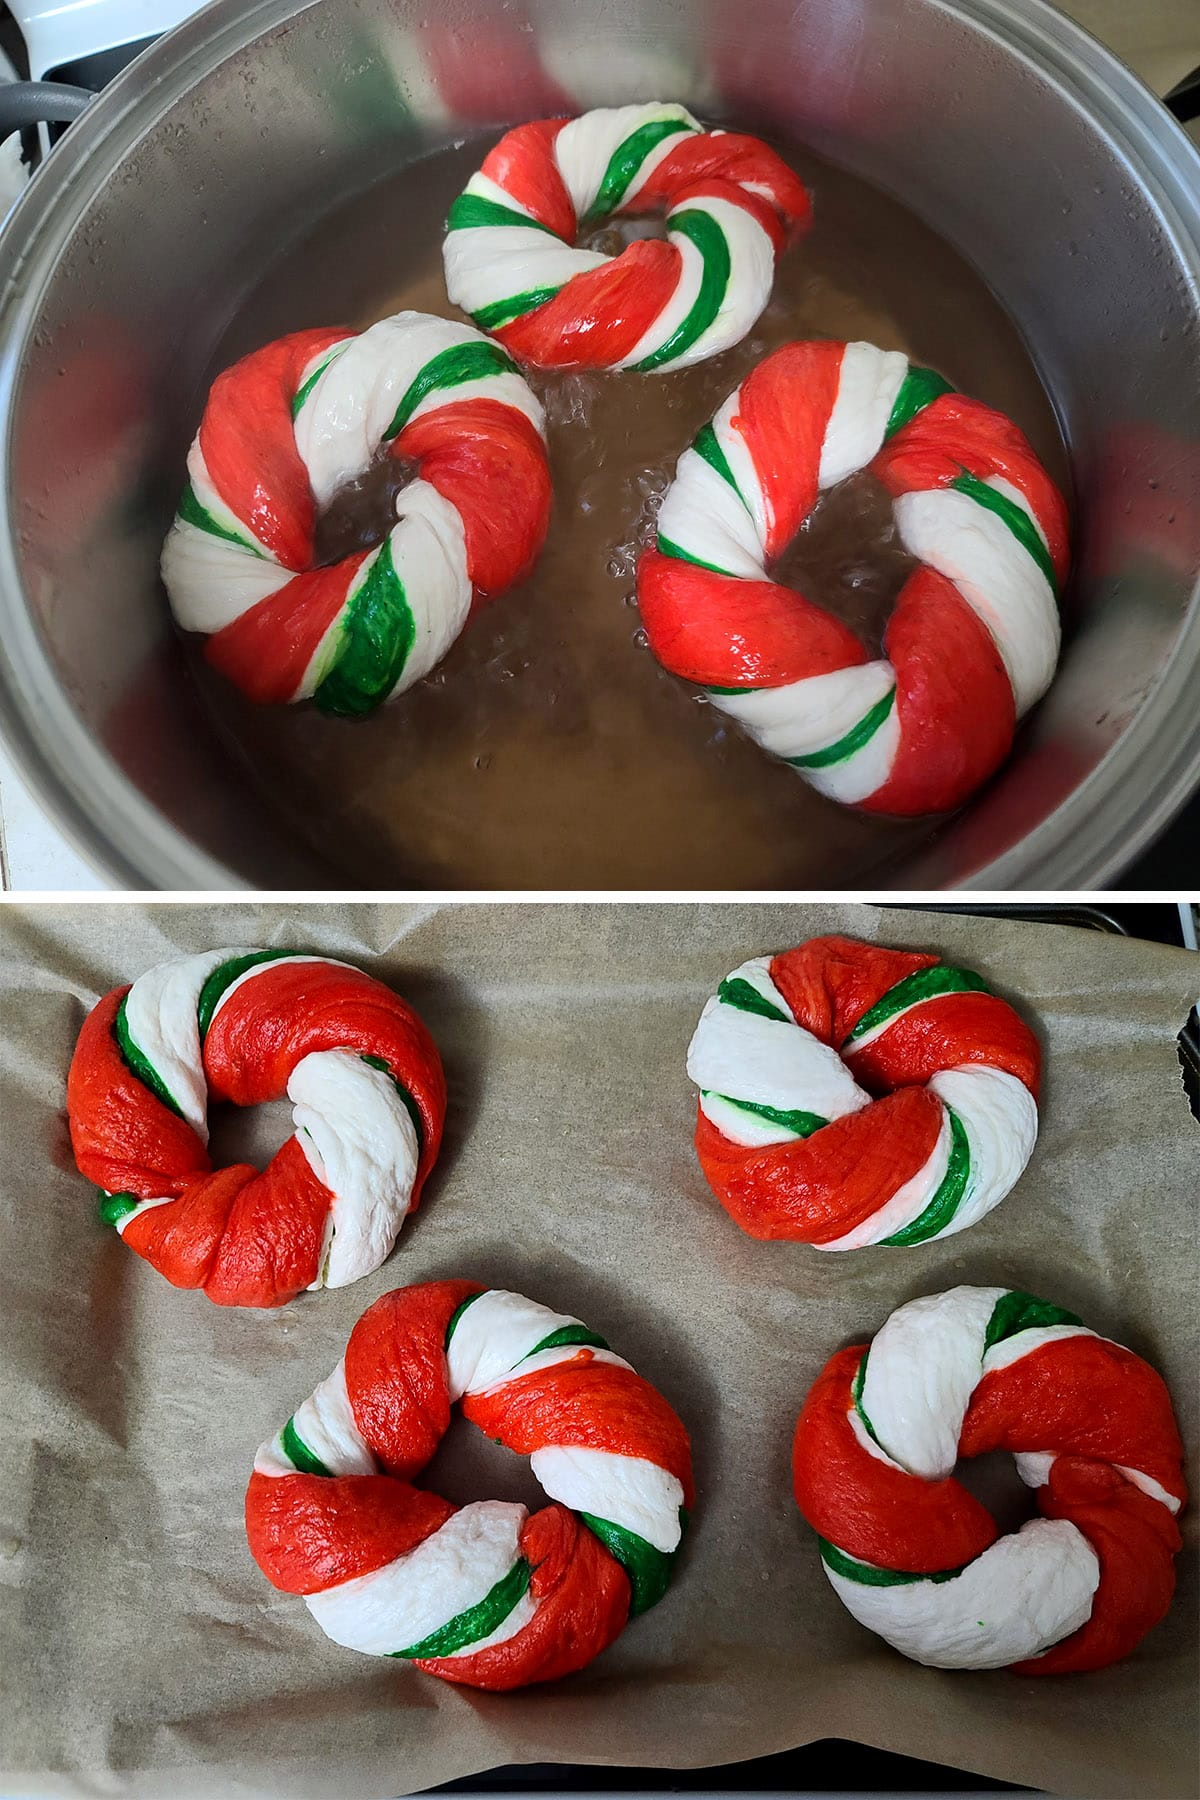 A 2 part image showing candy cane striped bagels simmering in a pot of water, then laid out on a prepared pan.